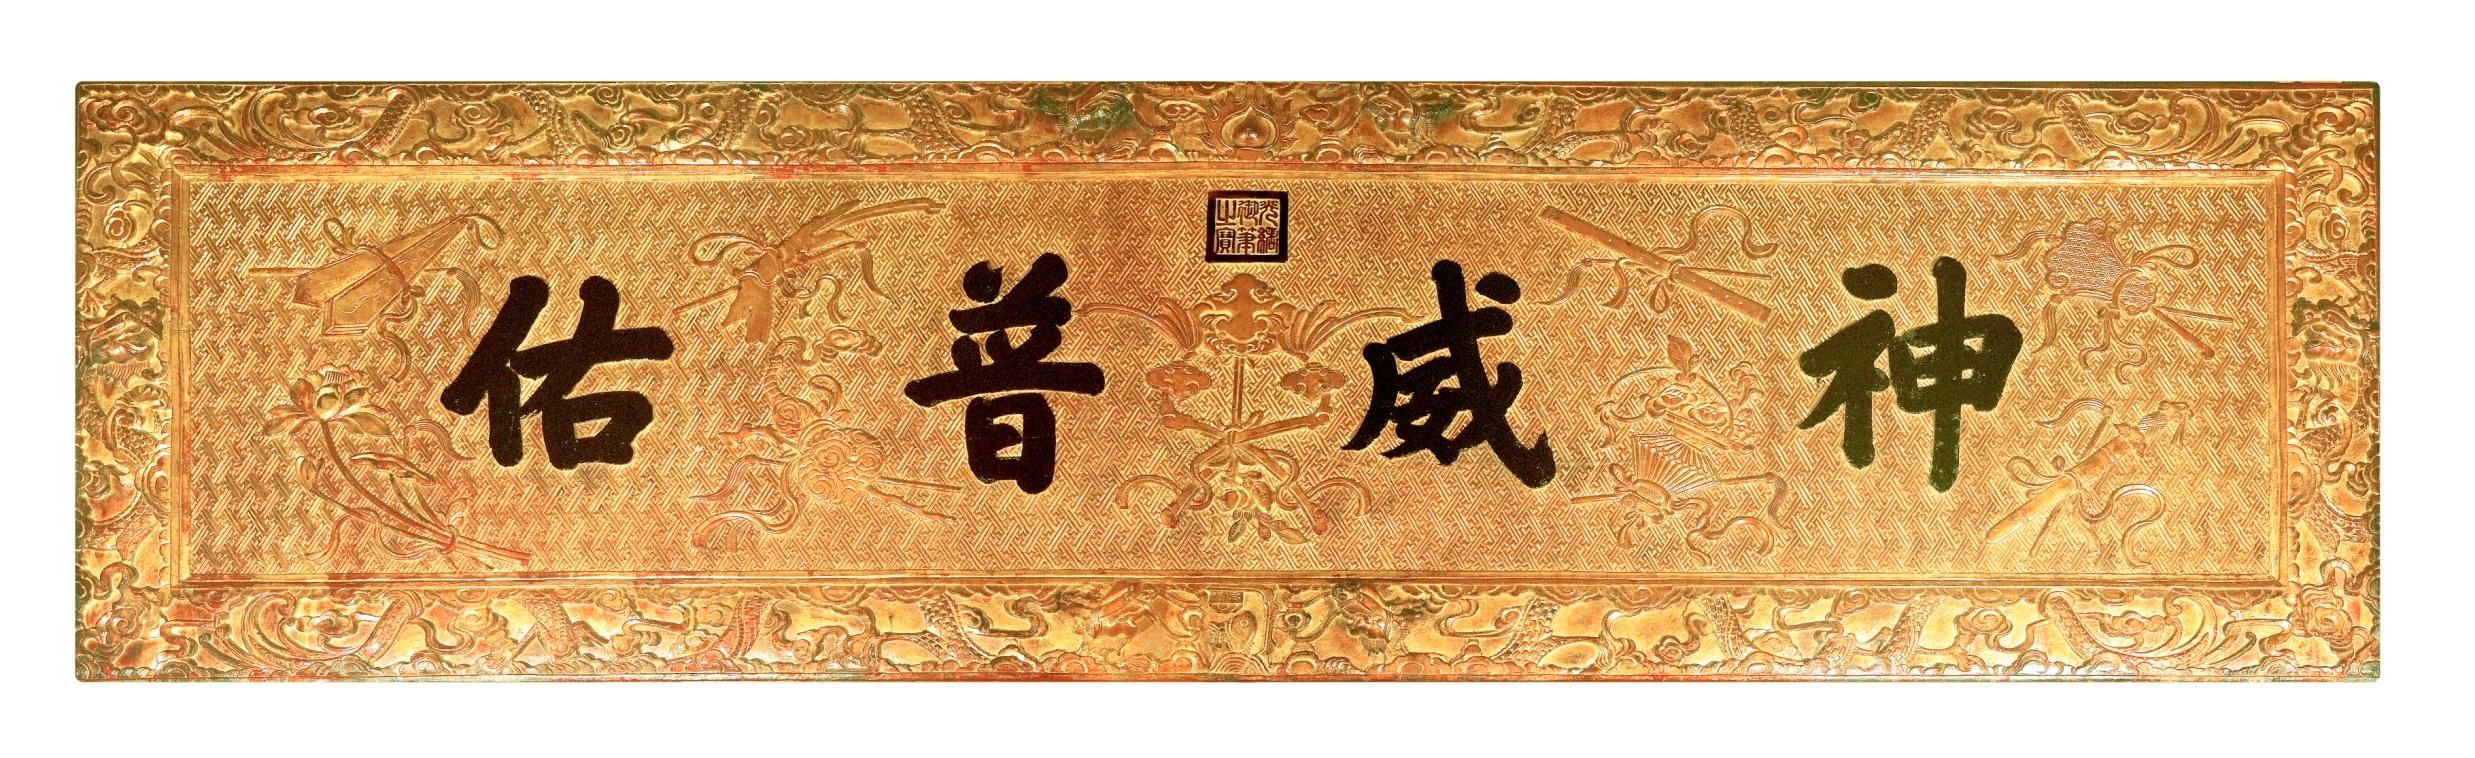 Jointly presented by the National Cultural Heritage Administration and the Development Bureau for the first time, the "Inseparable Ties: Cohesion as Told by Hong Kong Historic Buildings" exhibition officially opened today (November 9). Photo shows one of the highlight exhibits, a Tung Wah Hospital plaque bearing the inscription "Shen Wei Pu You" (literally meaning "God Protects All").